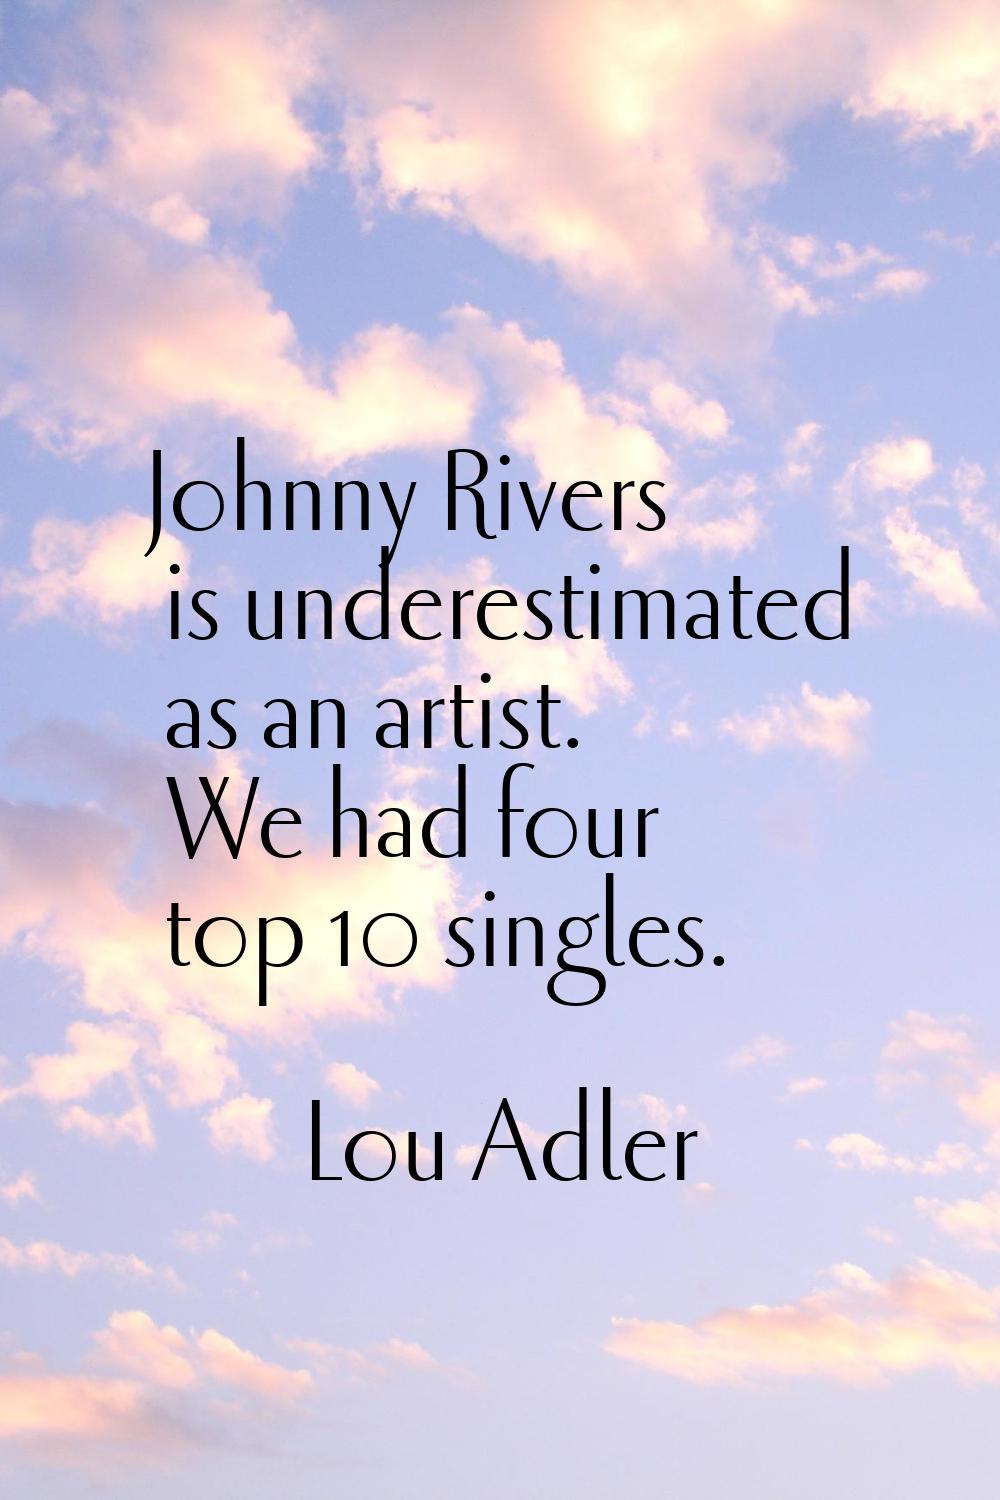 Johnny Rivers is underestimated as an artist. We had four top 10 singles.